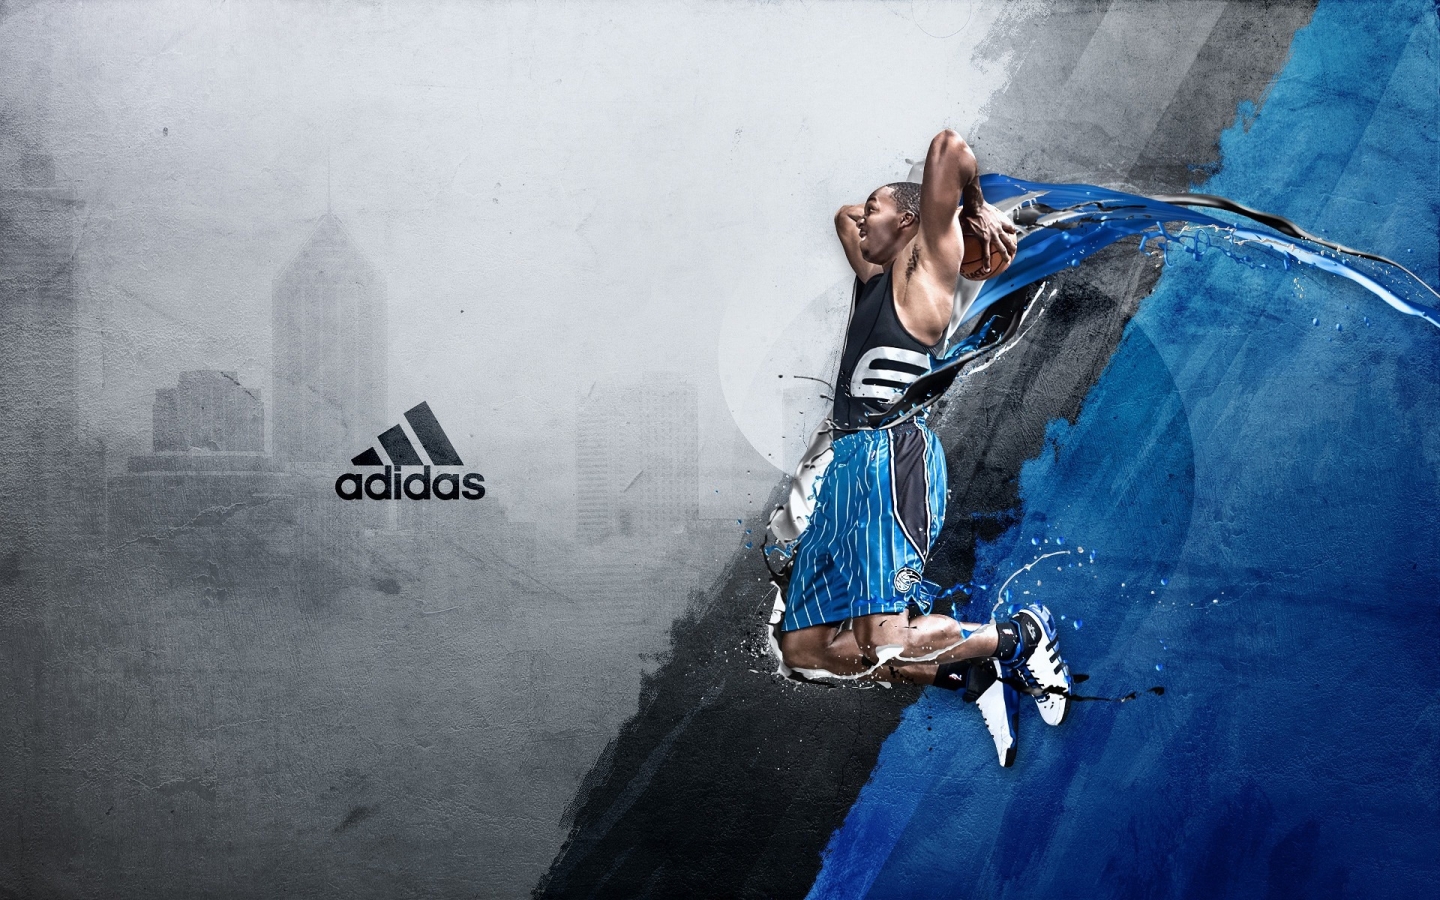 Dwight Howard Adidas for 1440 x 900 widescreen resolution